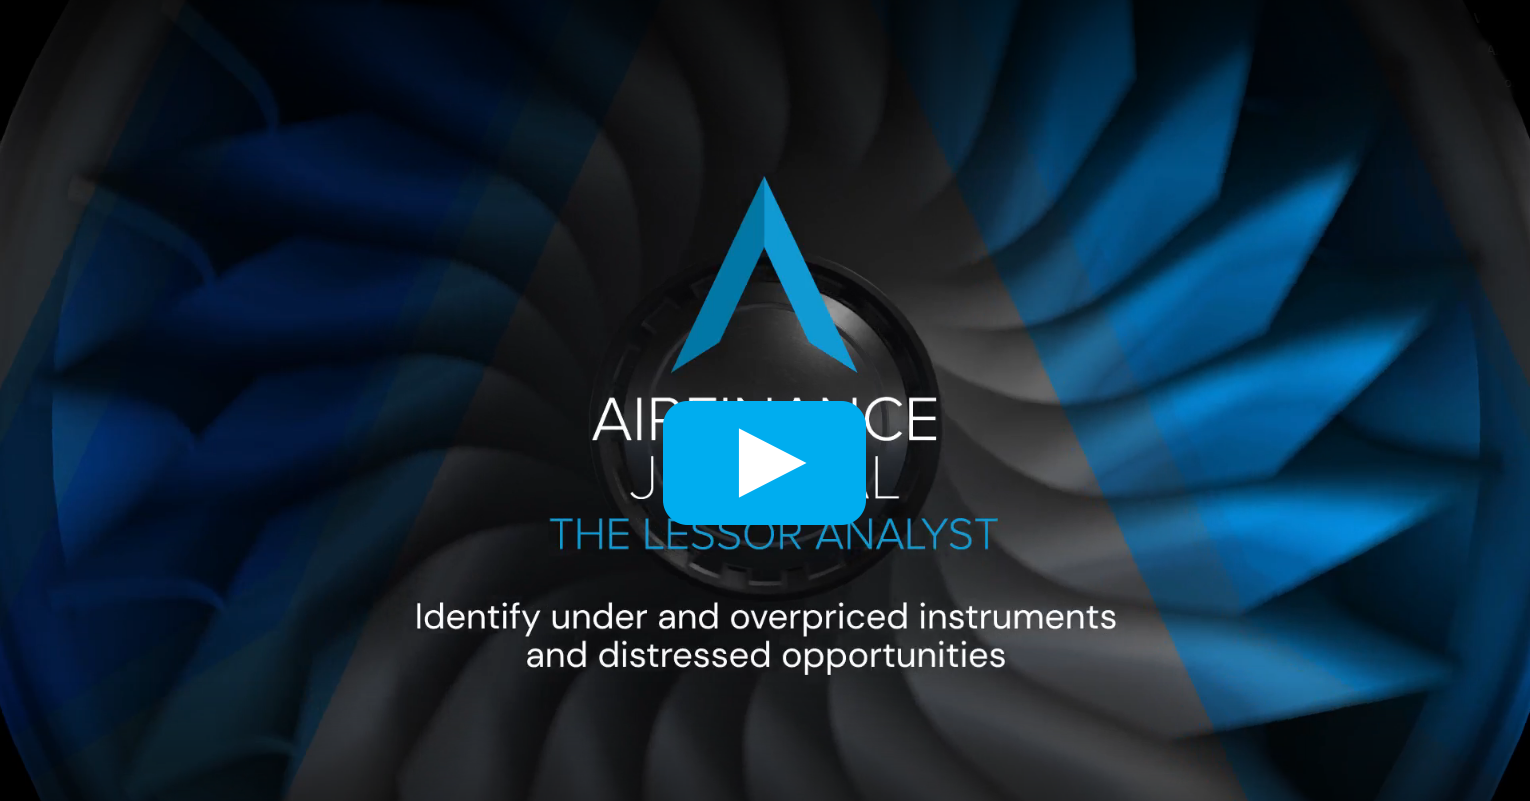 Identify over and under-priced instruments and distressed opportunities